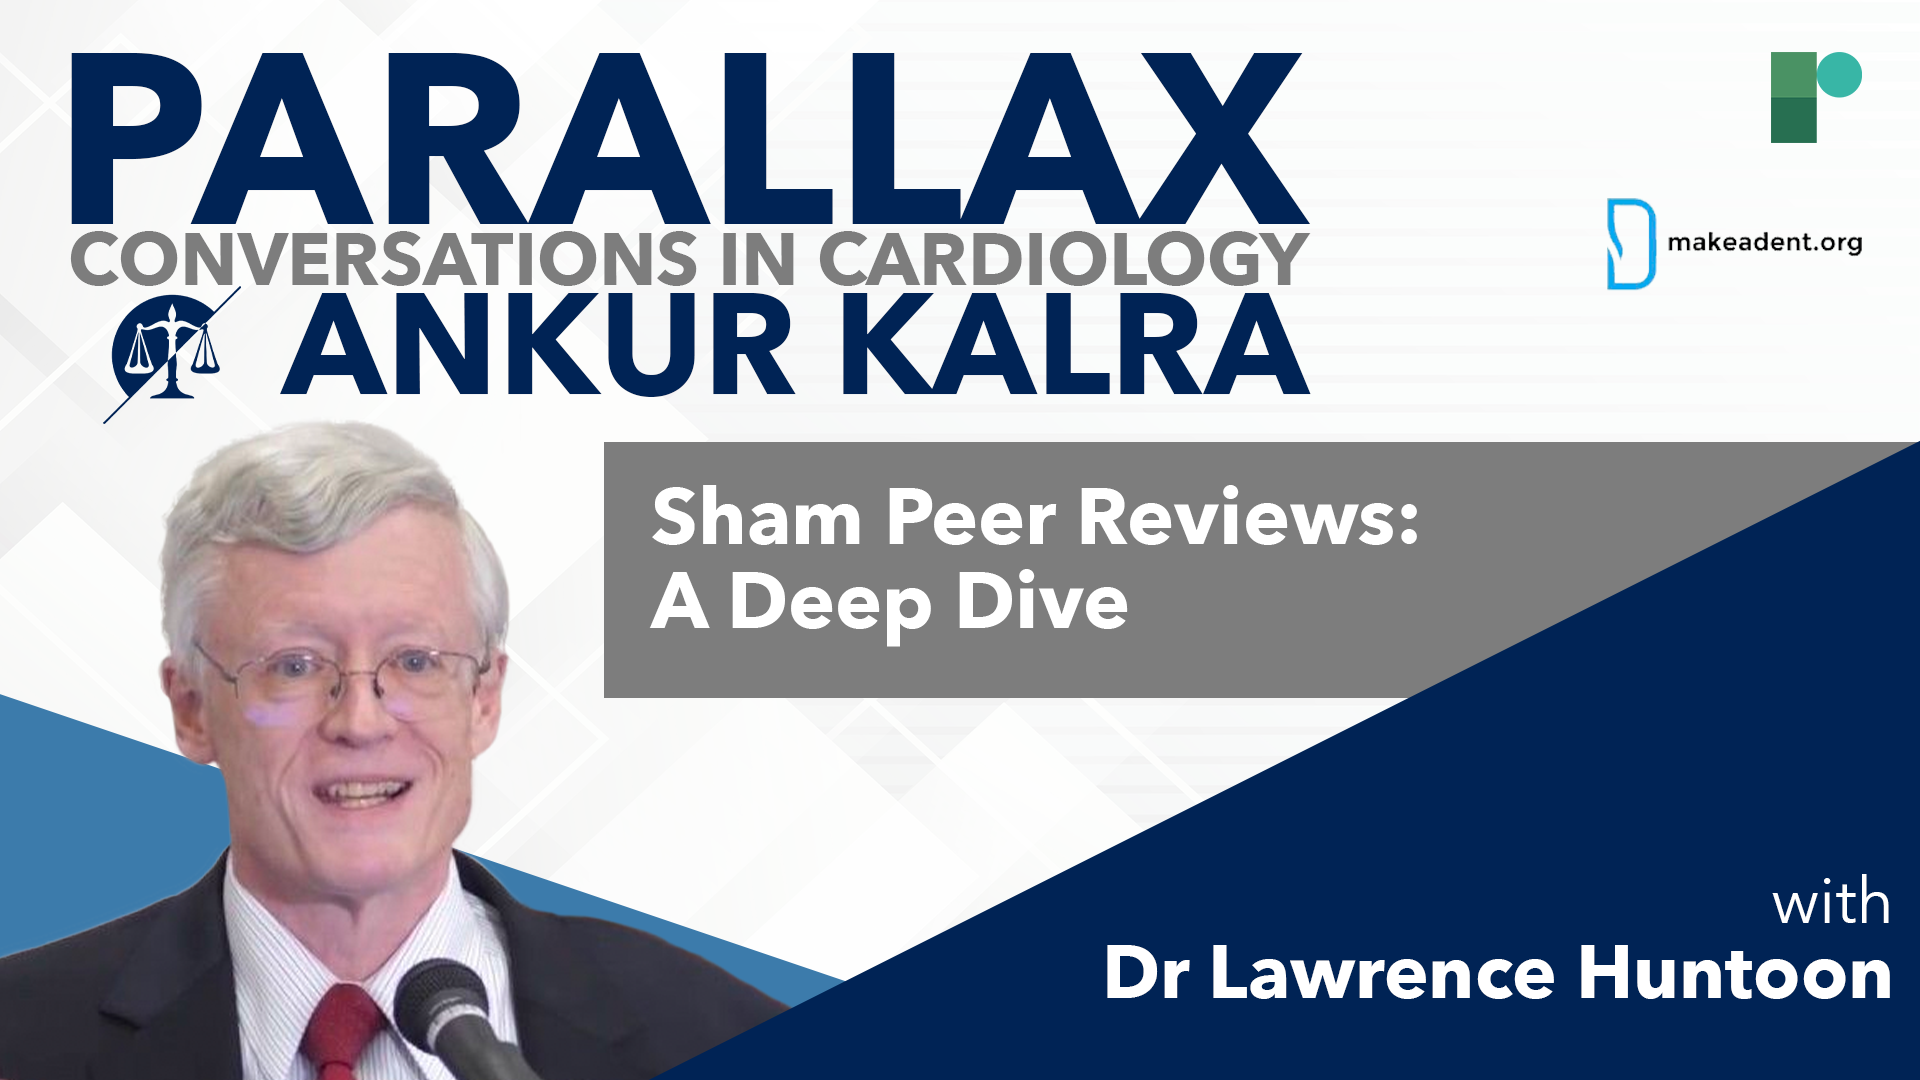 EP 83: Sham Peer Reviews: A Deep Dive with Dr Lawrence Huntoon